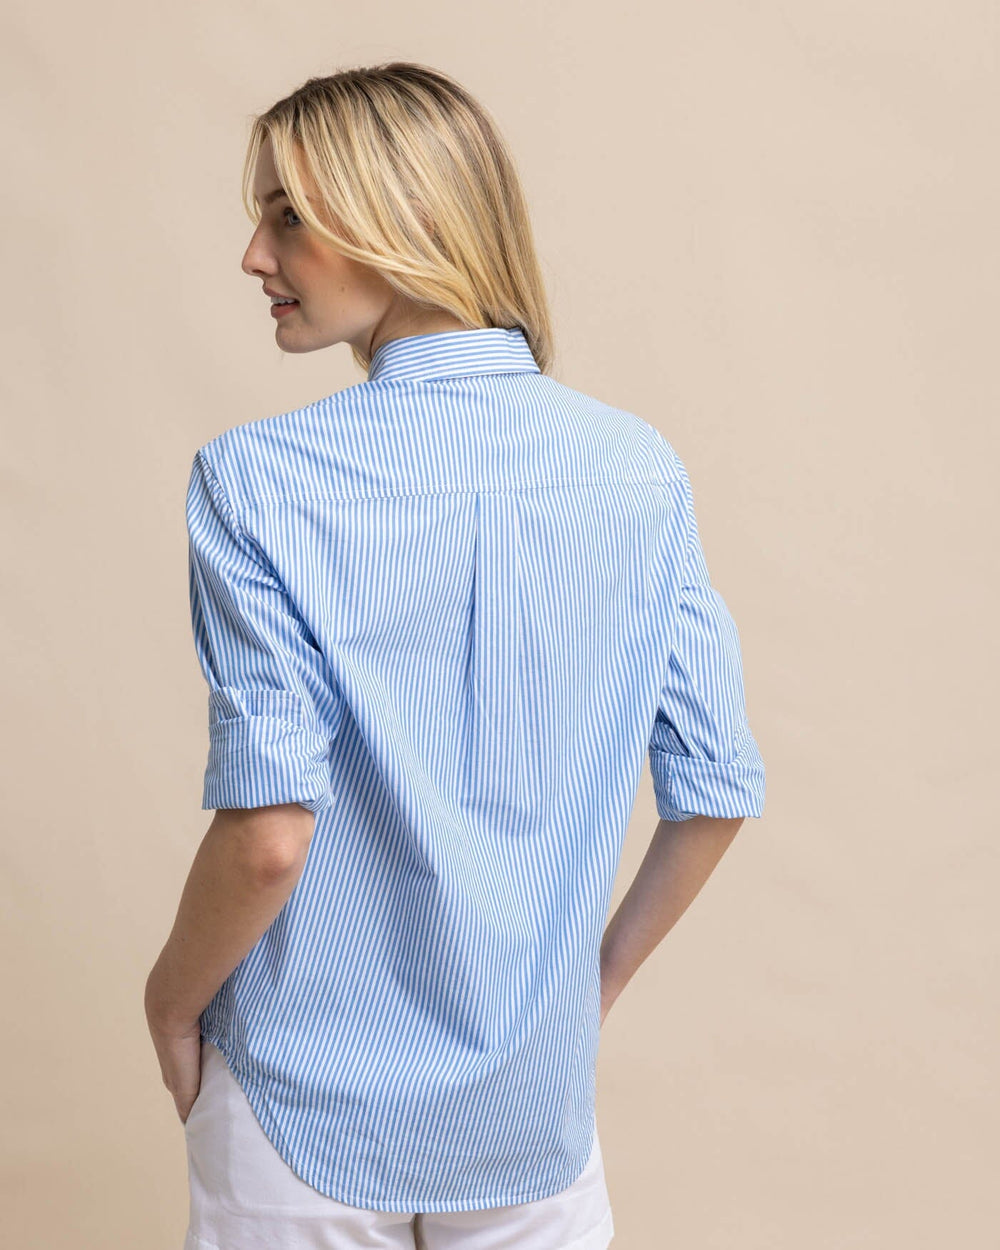 The back view of the Southern Tide Katherine Stripe Shirt by Southern Tide - Blue Fin